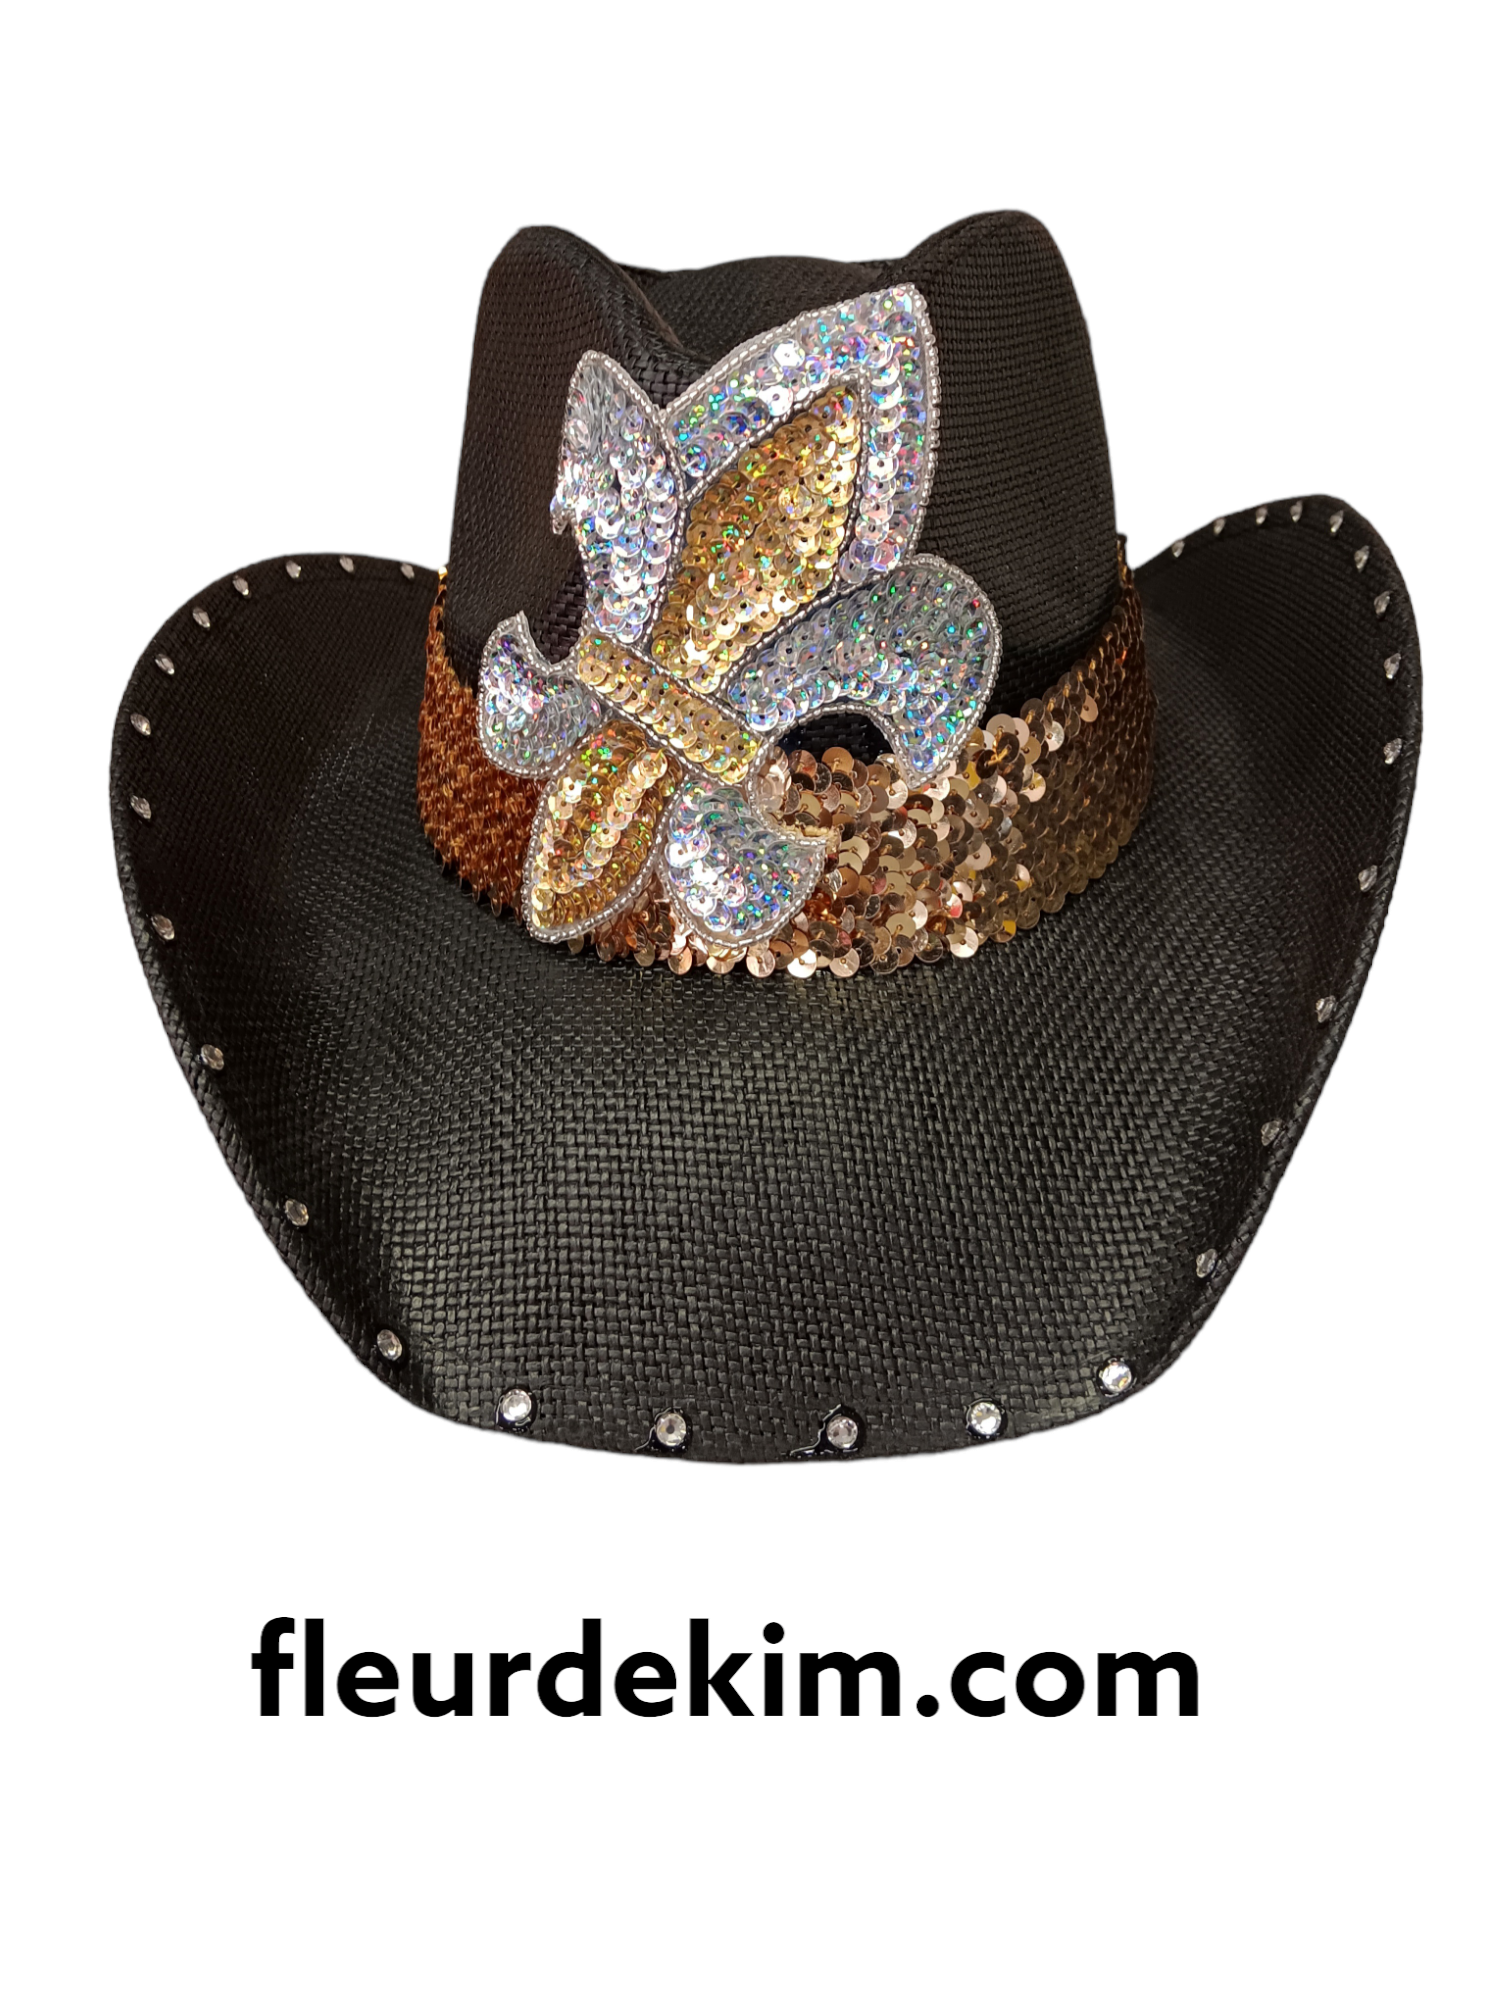 **limited** Cowboy hat with silver/gold sequin fleur de lis and bling